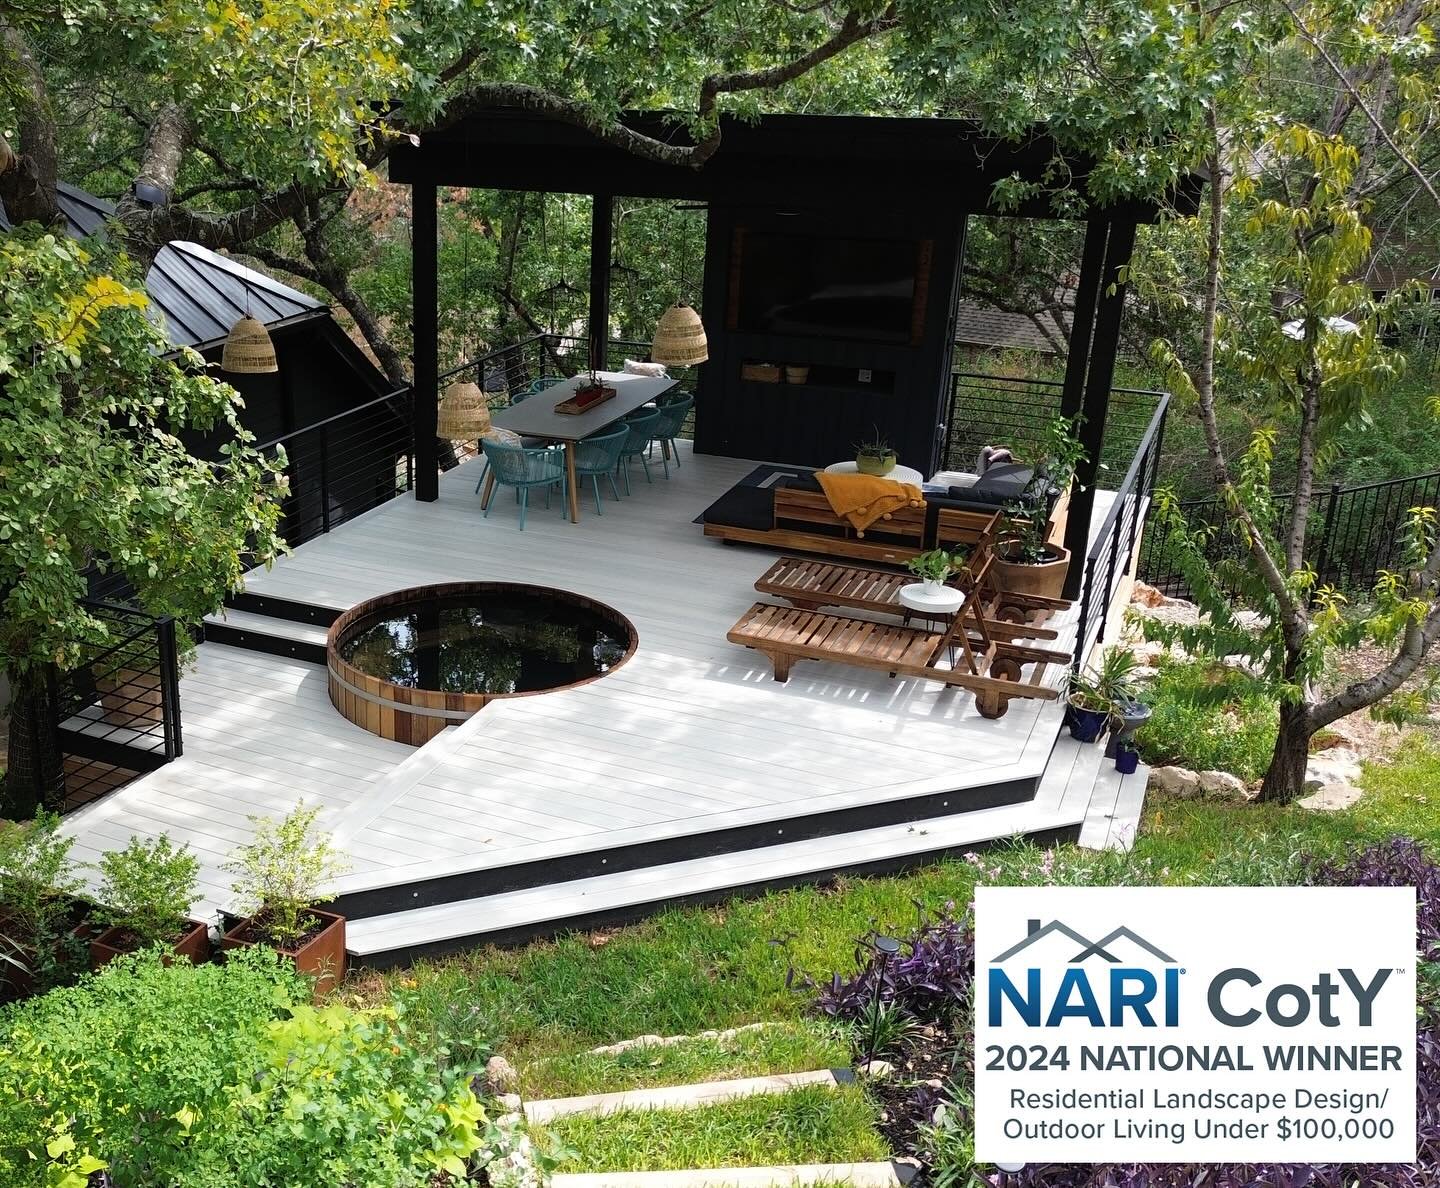 Proud to post this @nari_national 2024 National CotY award winning deck! Congratulations to Sloan for his amazing design and Edgar and crew for a beautiful build. Austin Deck is honored to be recognized with this award. 

@austinnari @timbertownausti